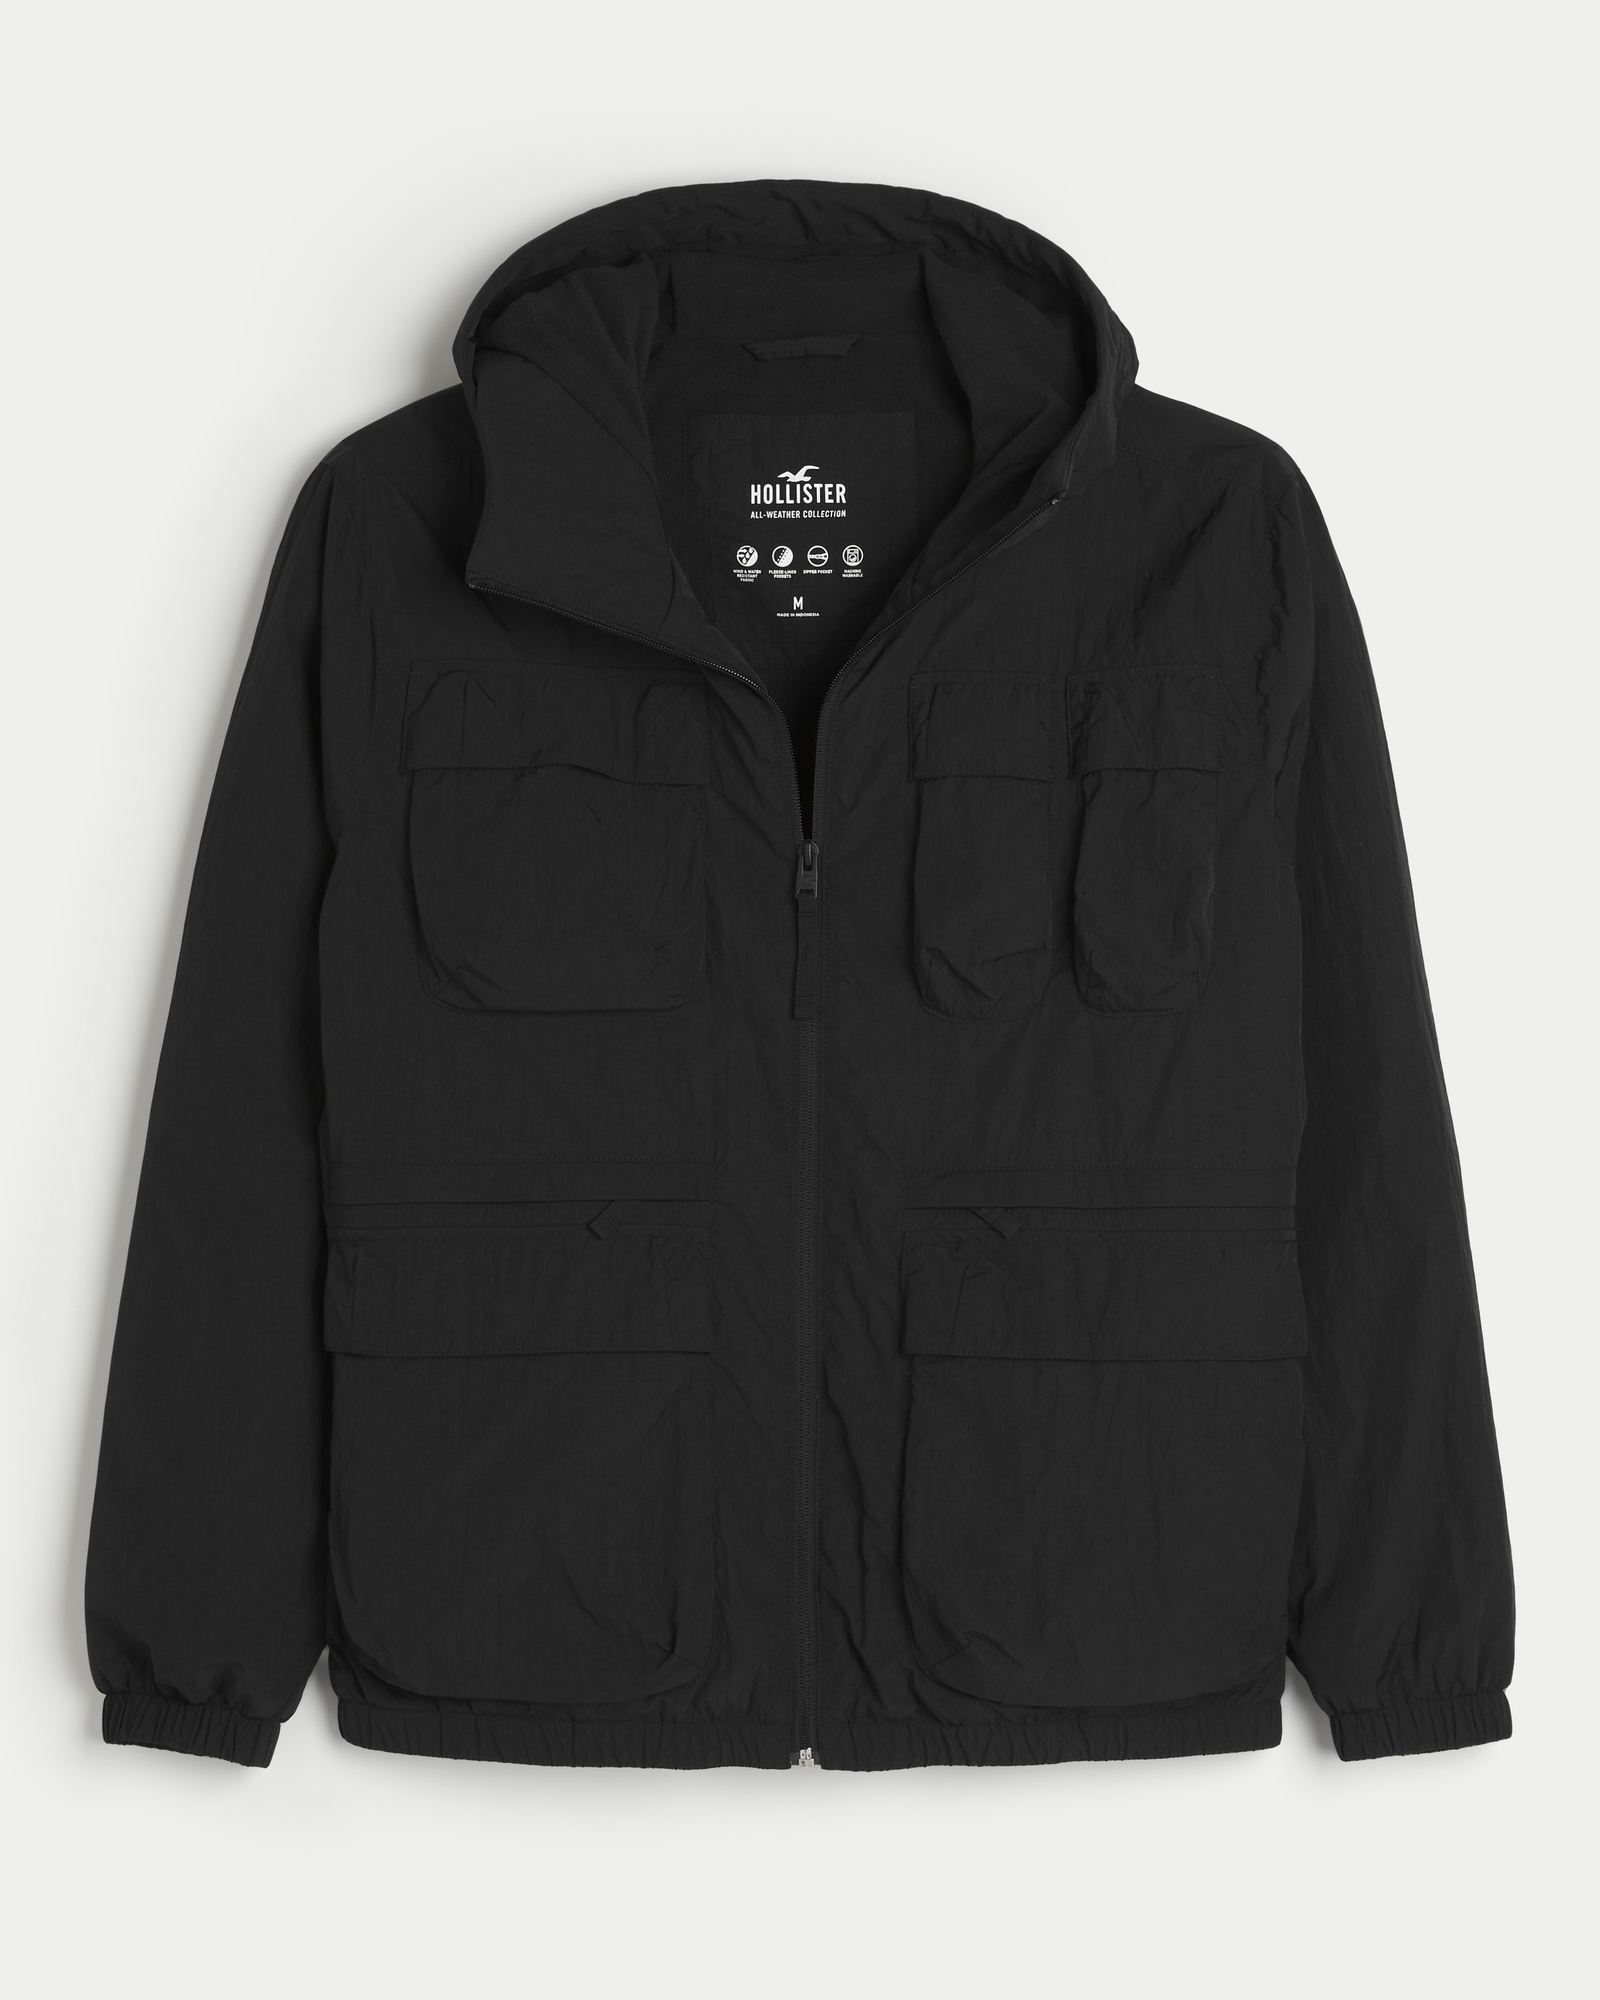 Hollister all weather collection - Gem